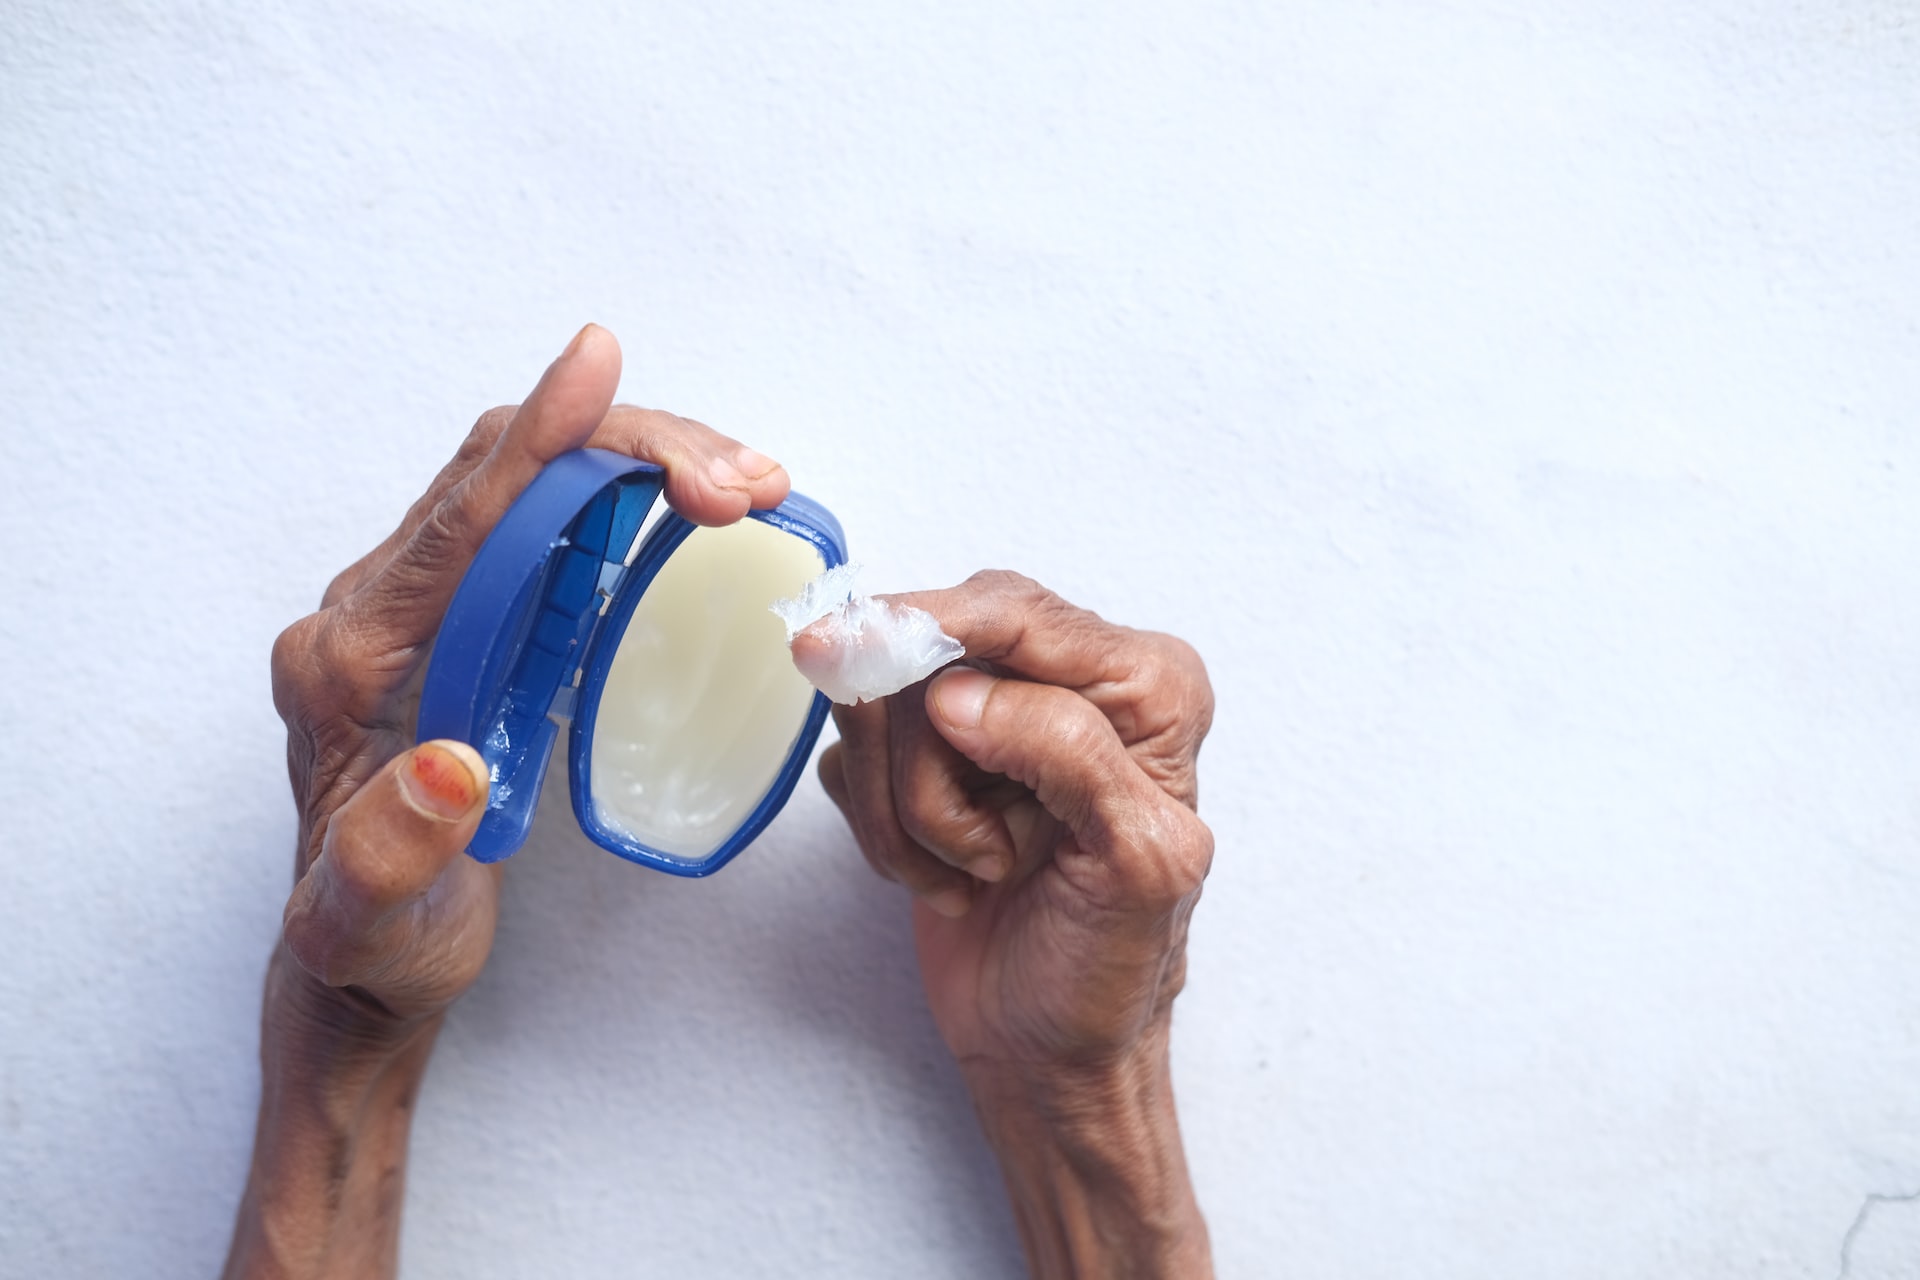 A person getting vaseline using one finger while holding a blue container near a white surface